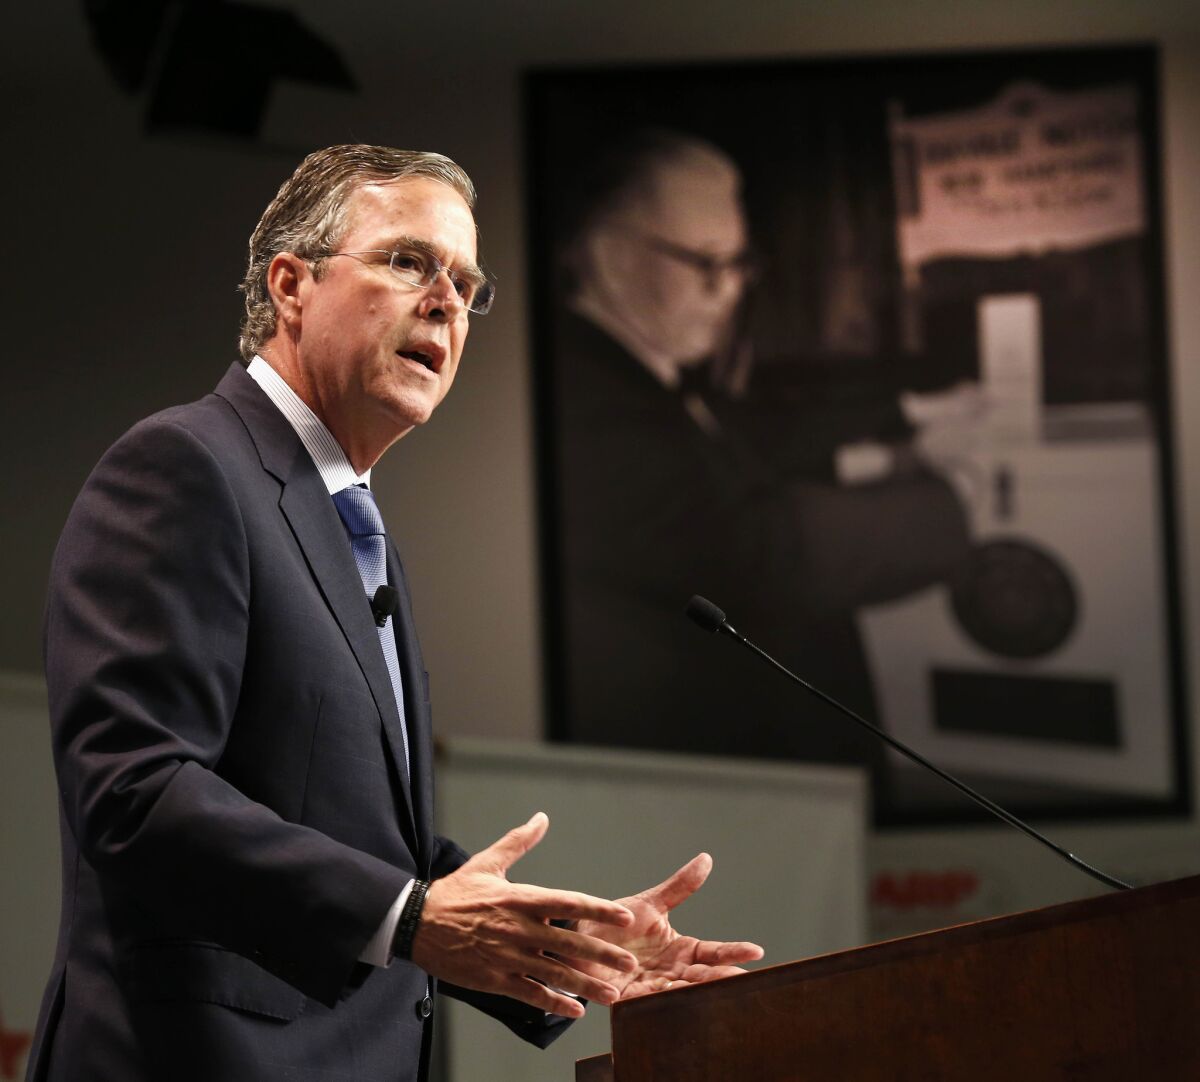 Former Florida Gov. Jeb Bush announces his plan to repeal and replace President Obama's healthcare law, Tuesday at Saint Anselm College in Manchester, N.H.